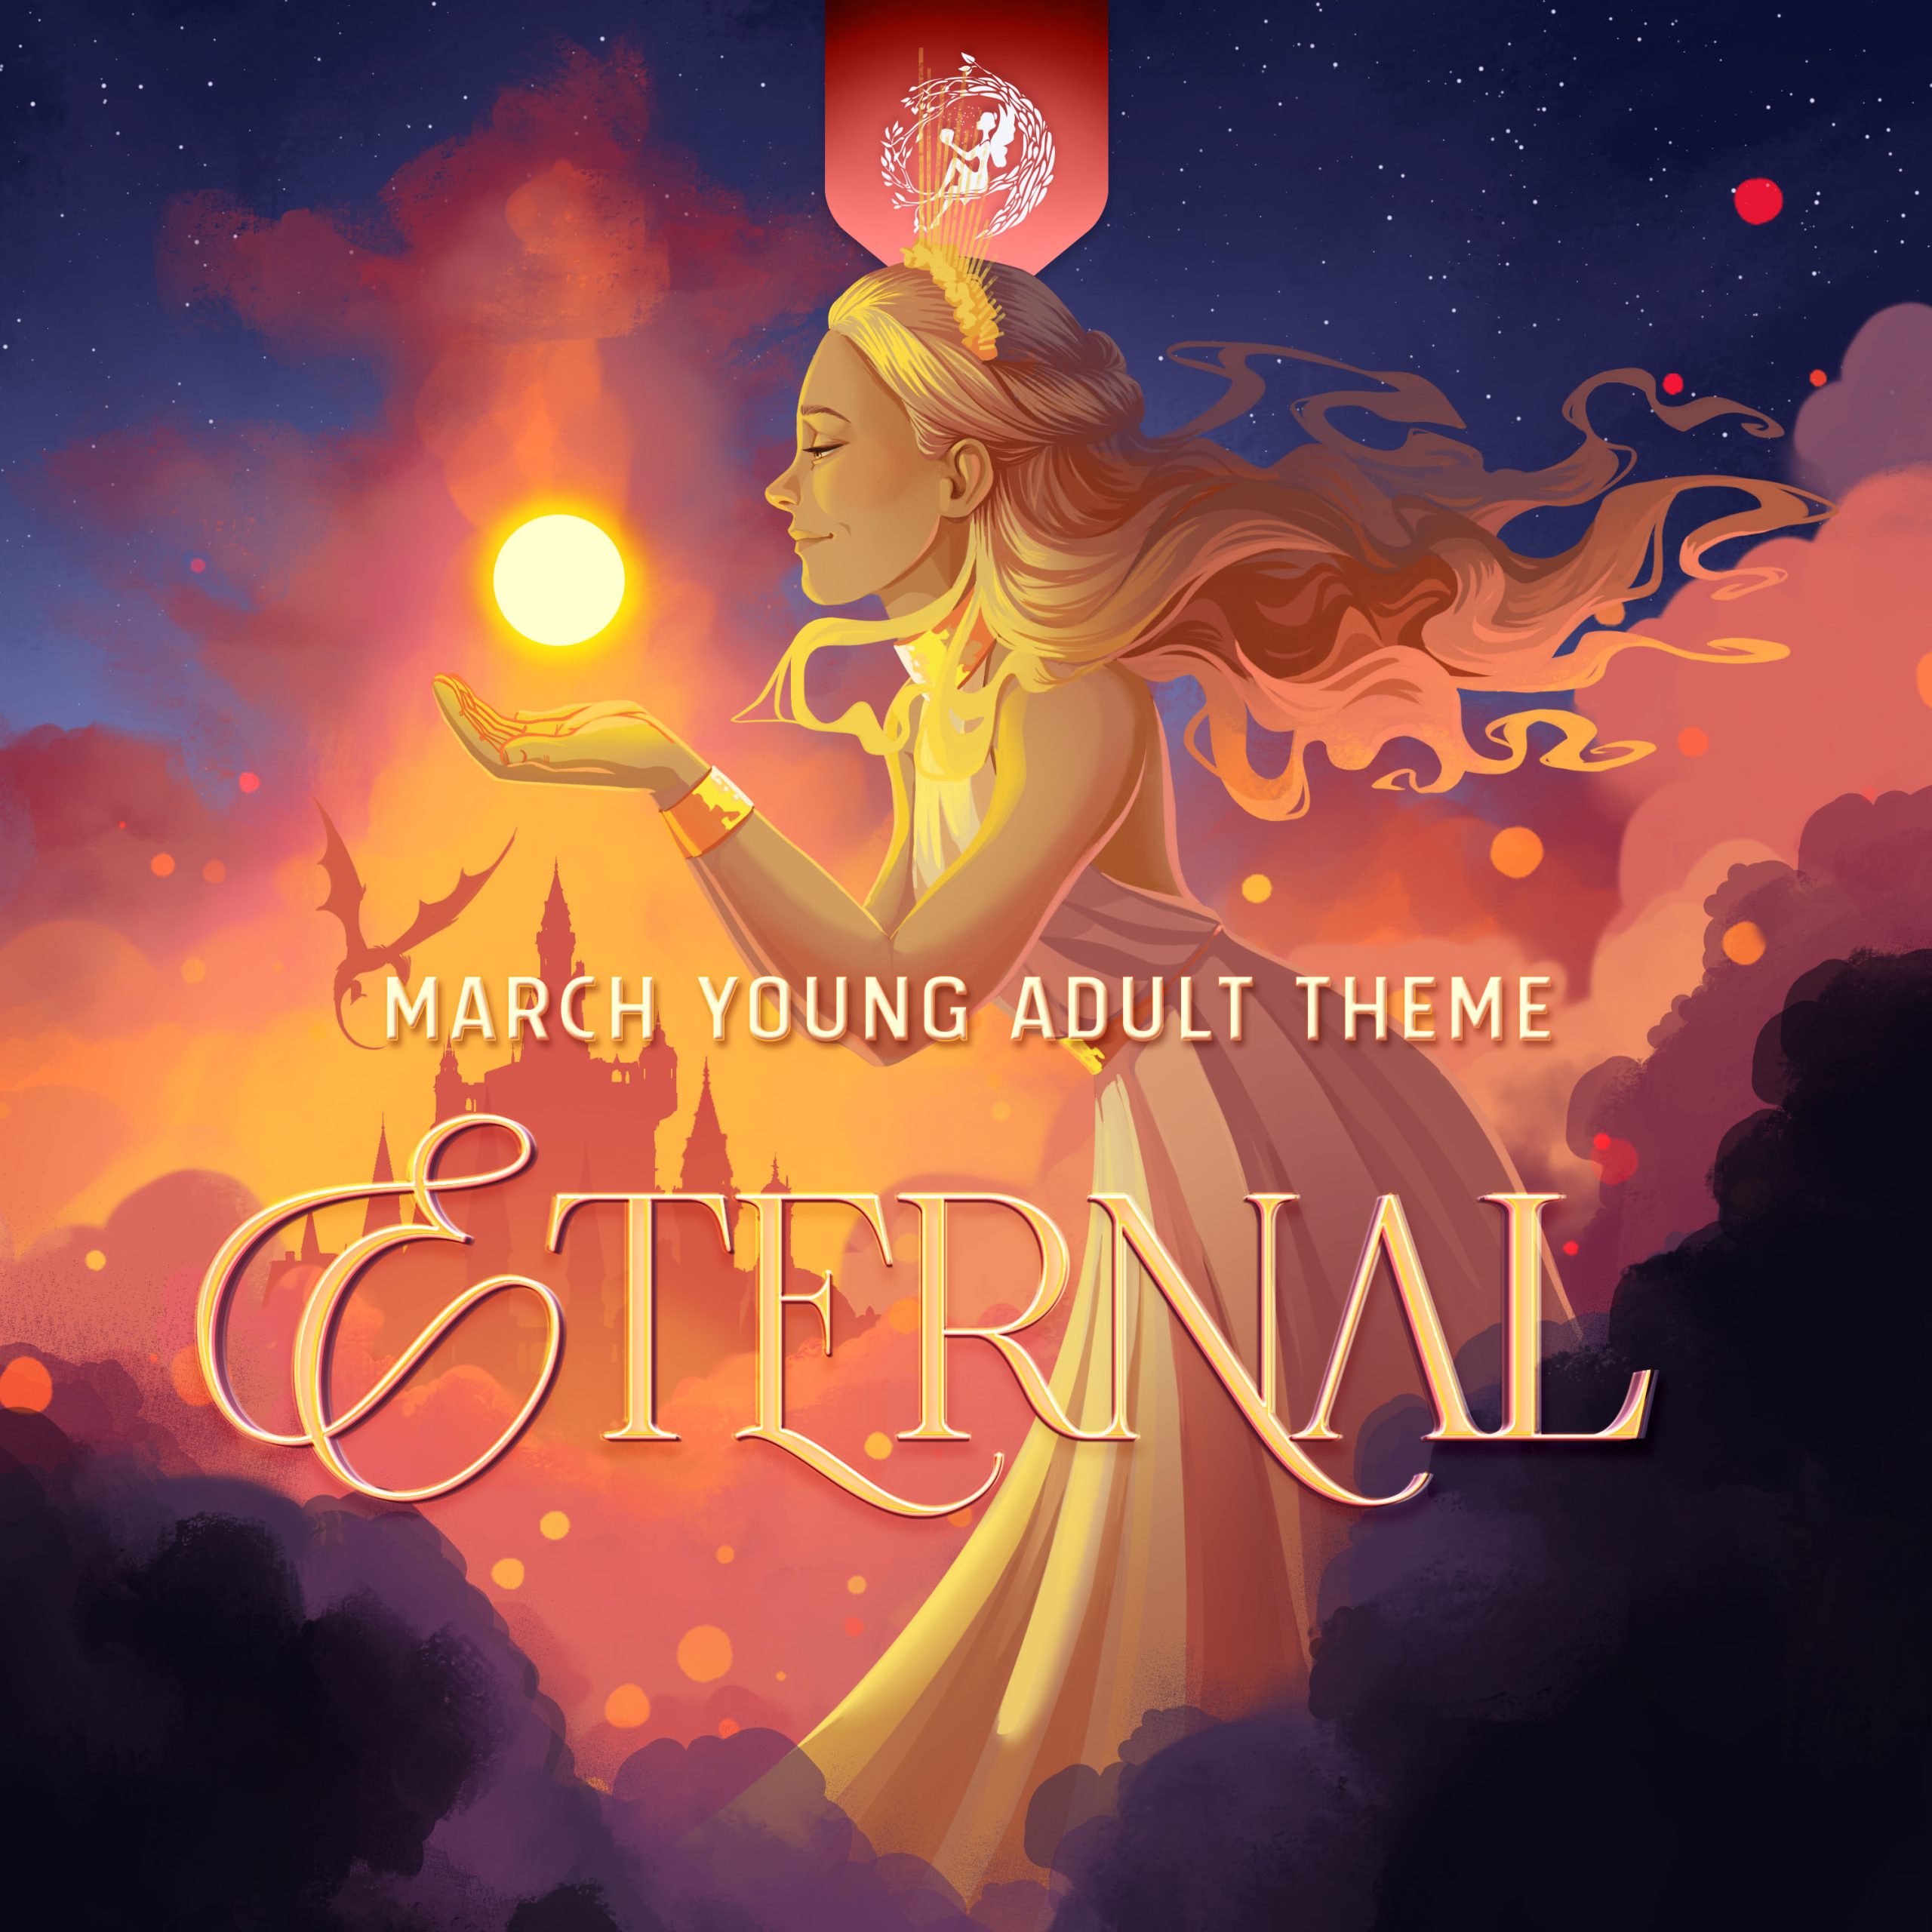 March Young Adult Theme: ETERNAL